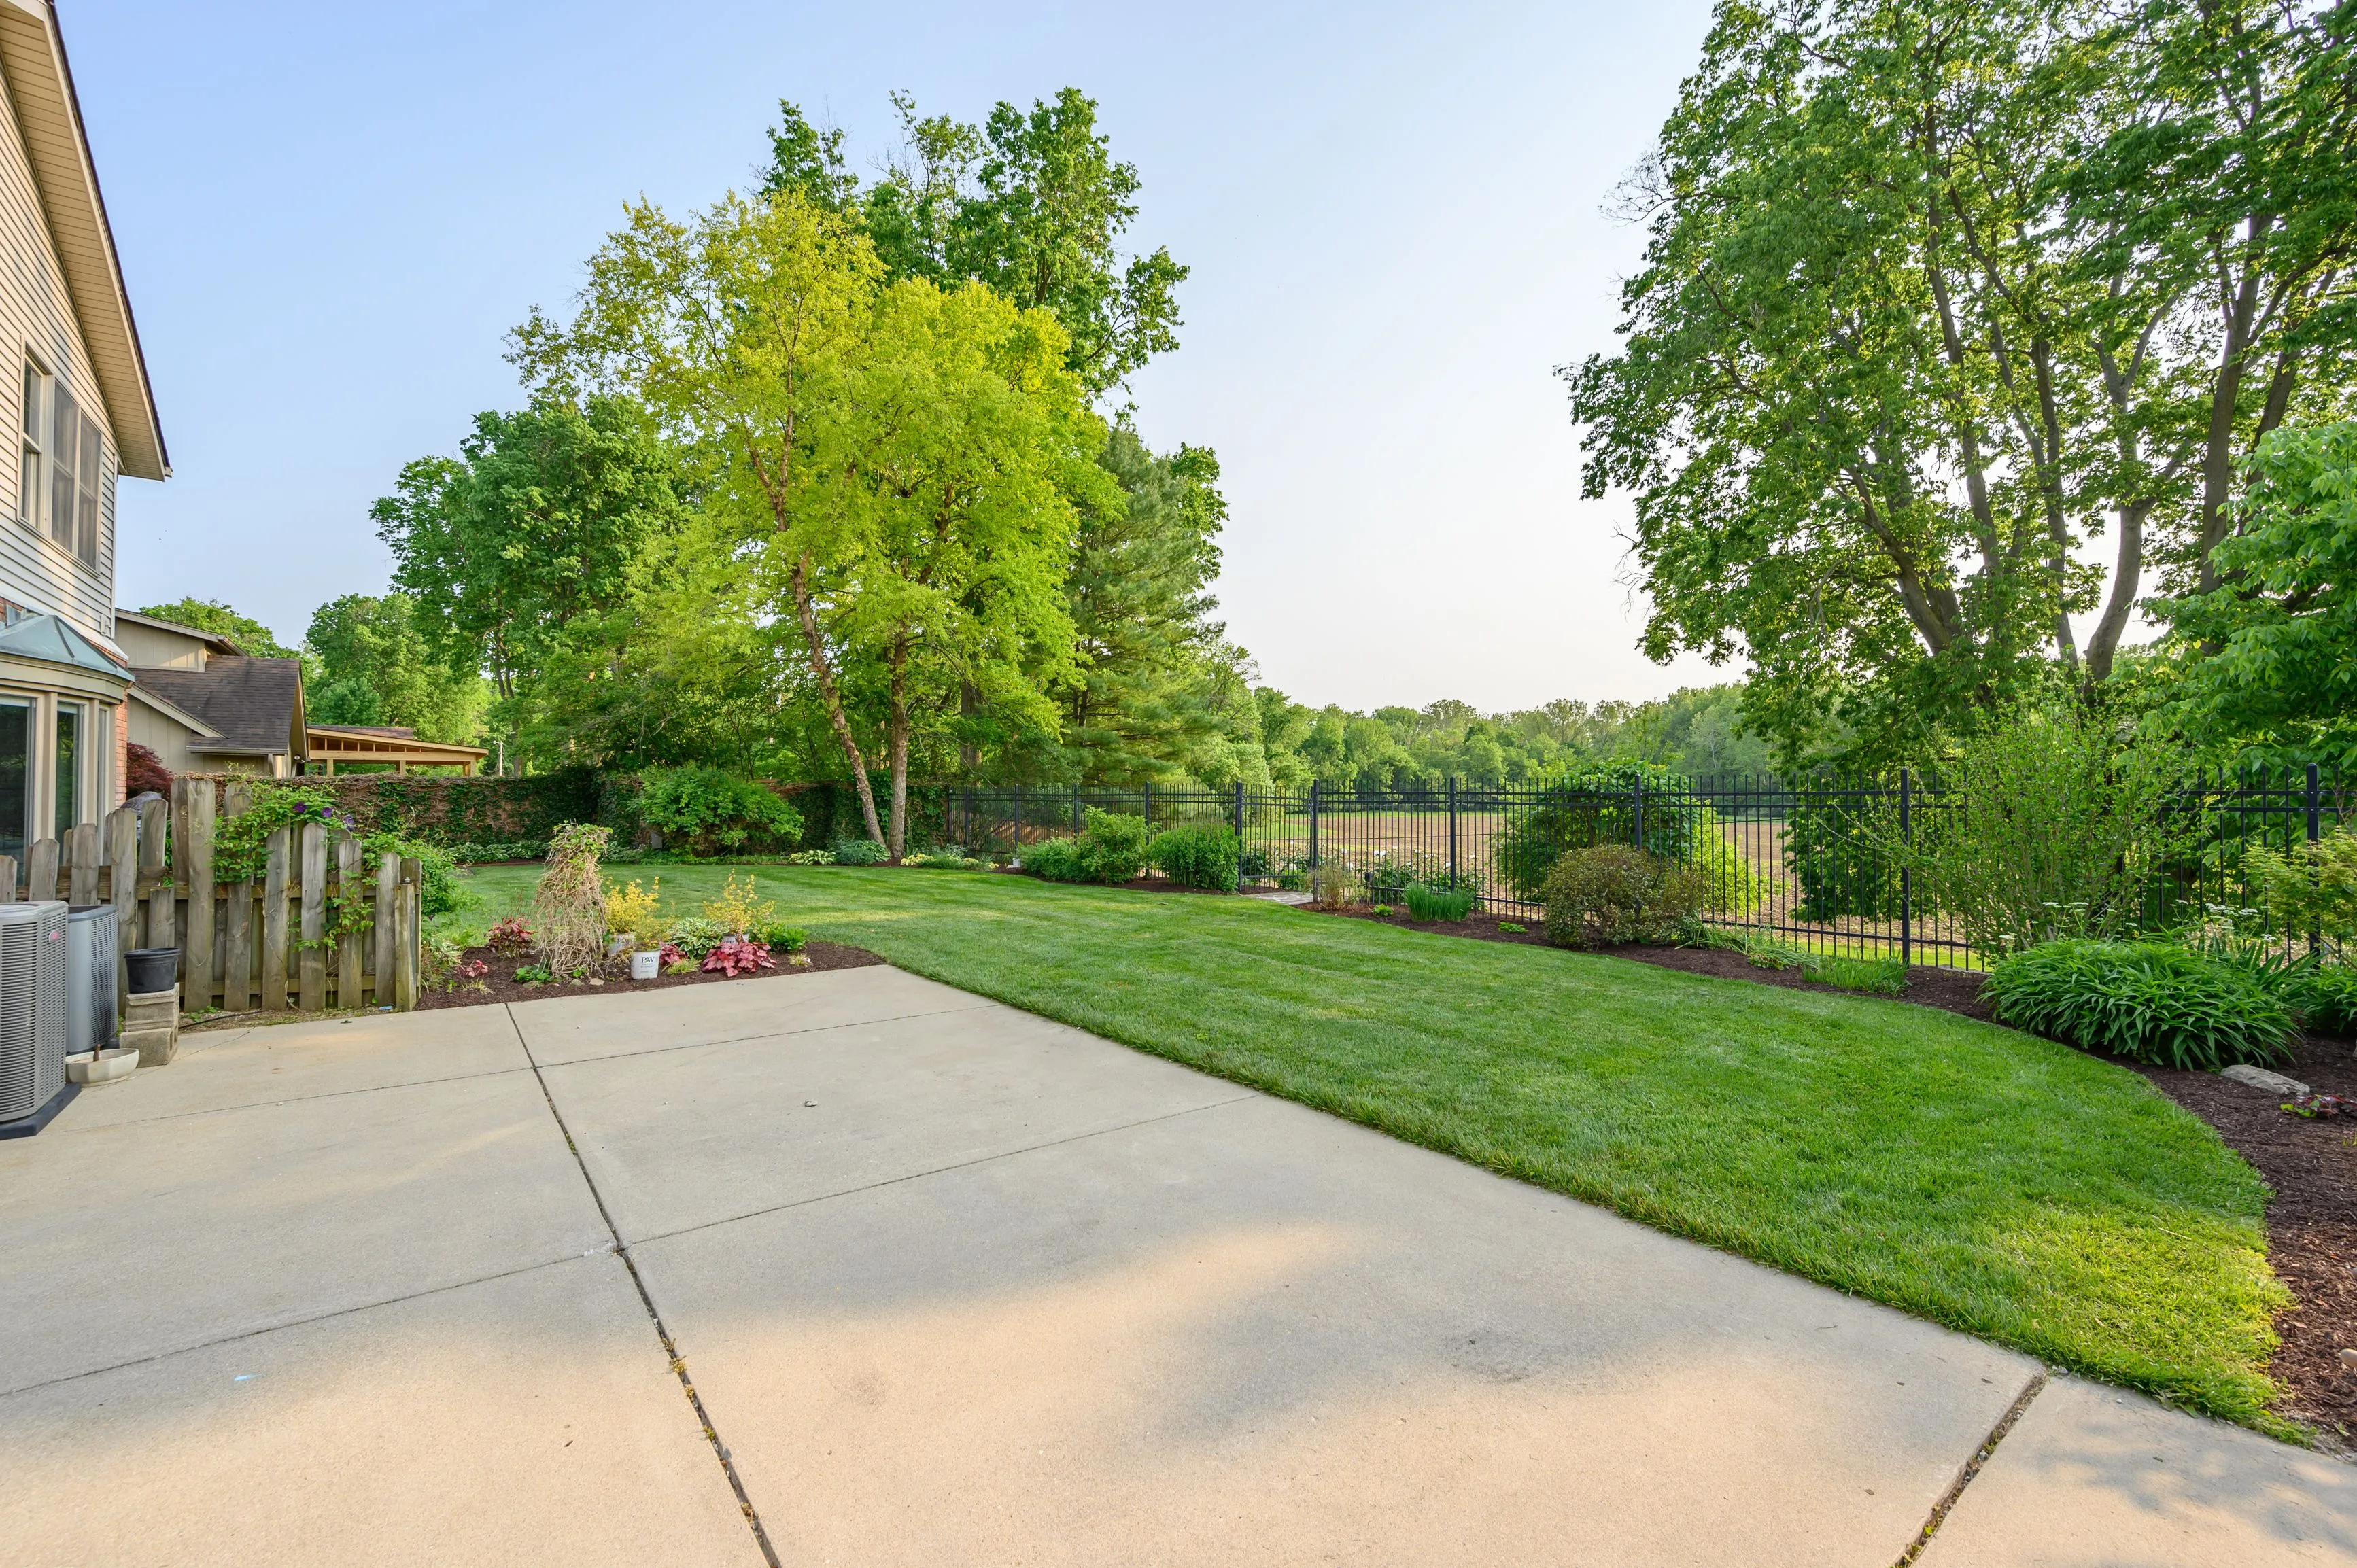  A concrete driveway leading to a residential backyard with lush green trees and lawn on a sunny day.